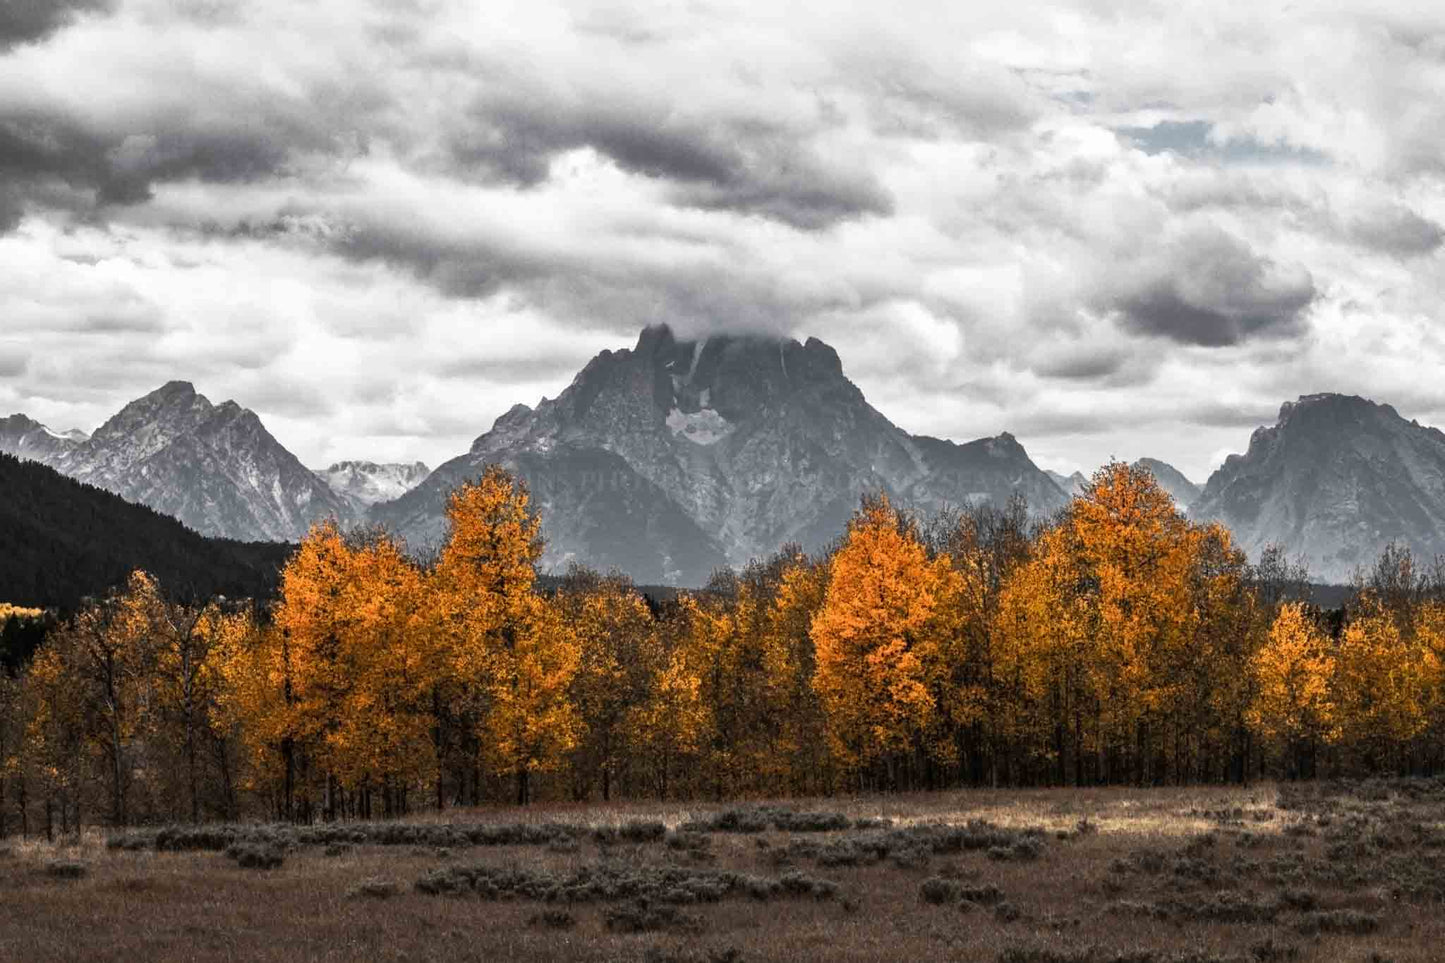 Rocky Mountain photography print of Mount Moran in black and white overlooking golden aspen trees in color on an autumn day in Grand Teton National Park, Wyoming by Sean Ramsey of Southern Plains Photography.